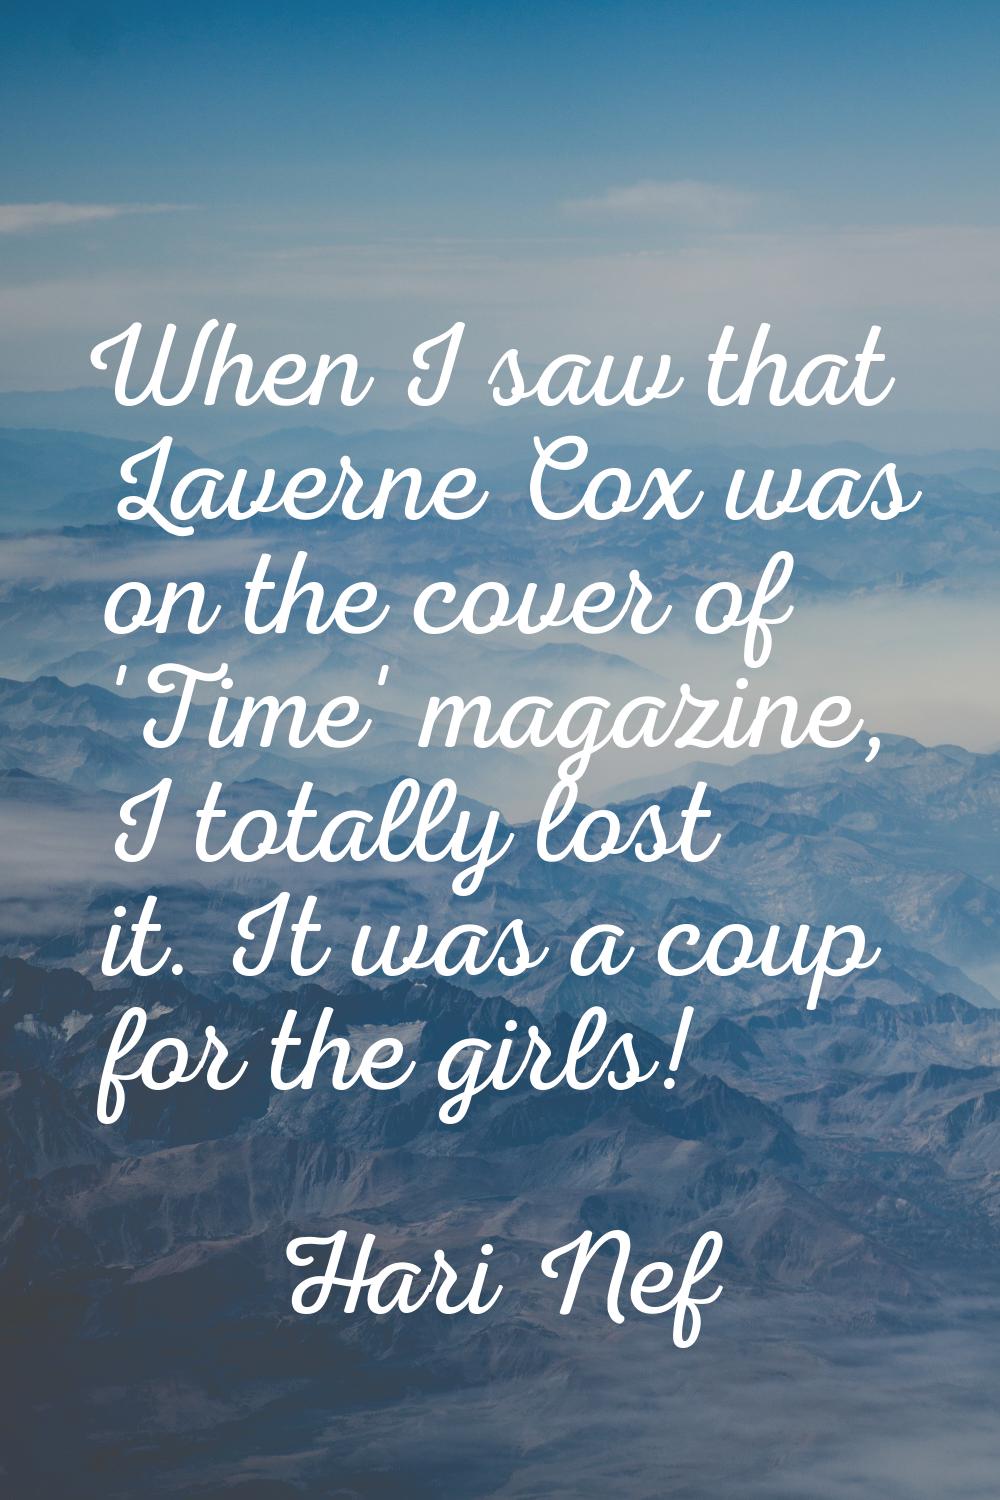 When I saw that Laverne Cox was on the cover of 'Time' magazine, I totally lost it. It was a coup f